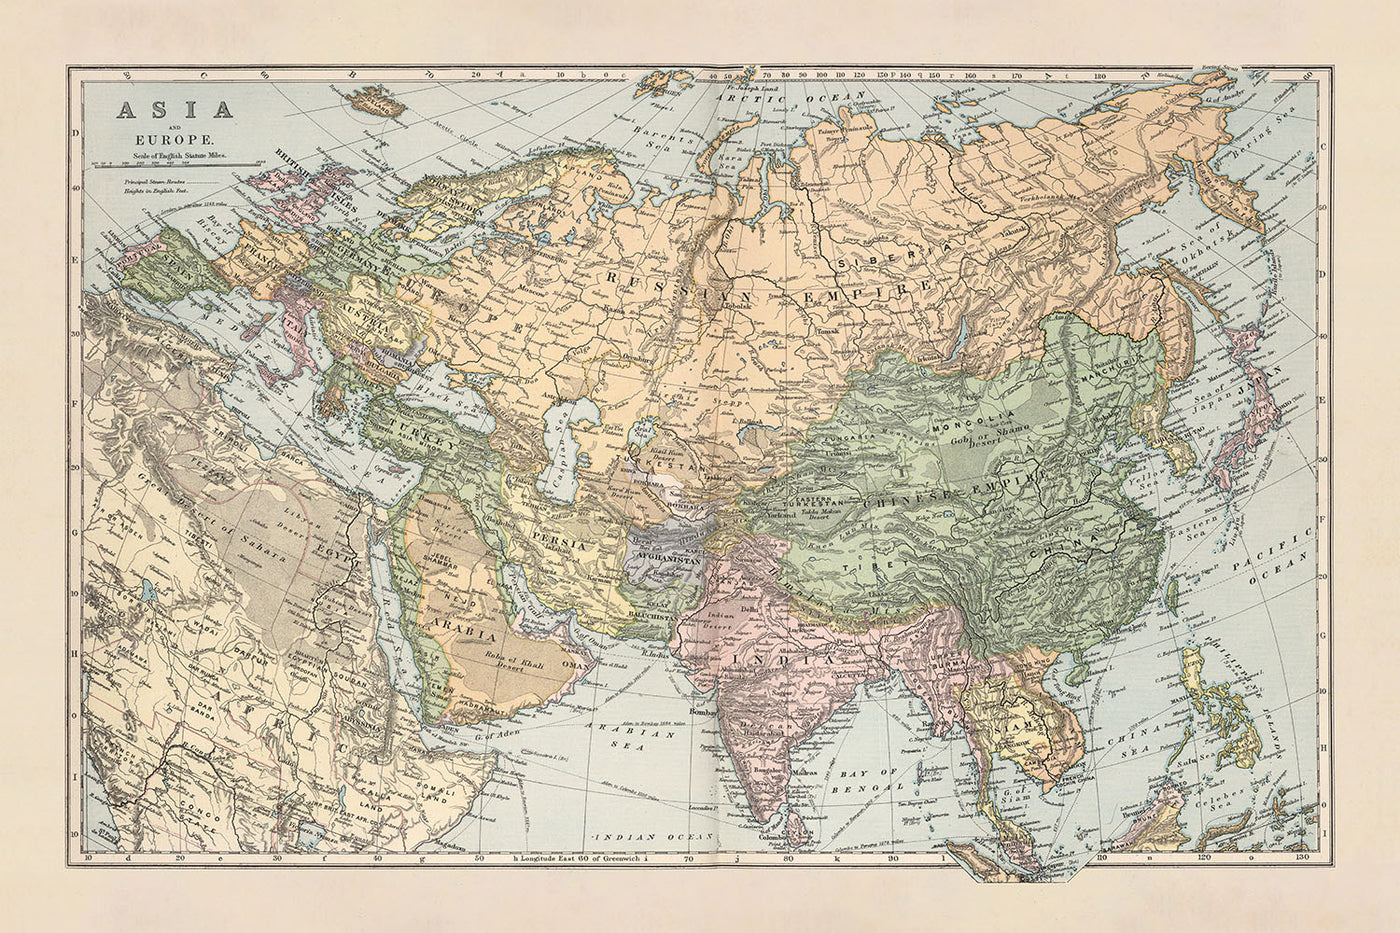 Old Map of Asia & Europe by Appleton, 1892: Political Divisions, Major Cities, Steam Routes